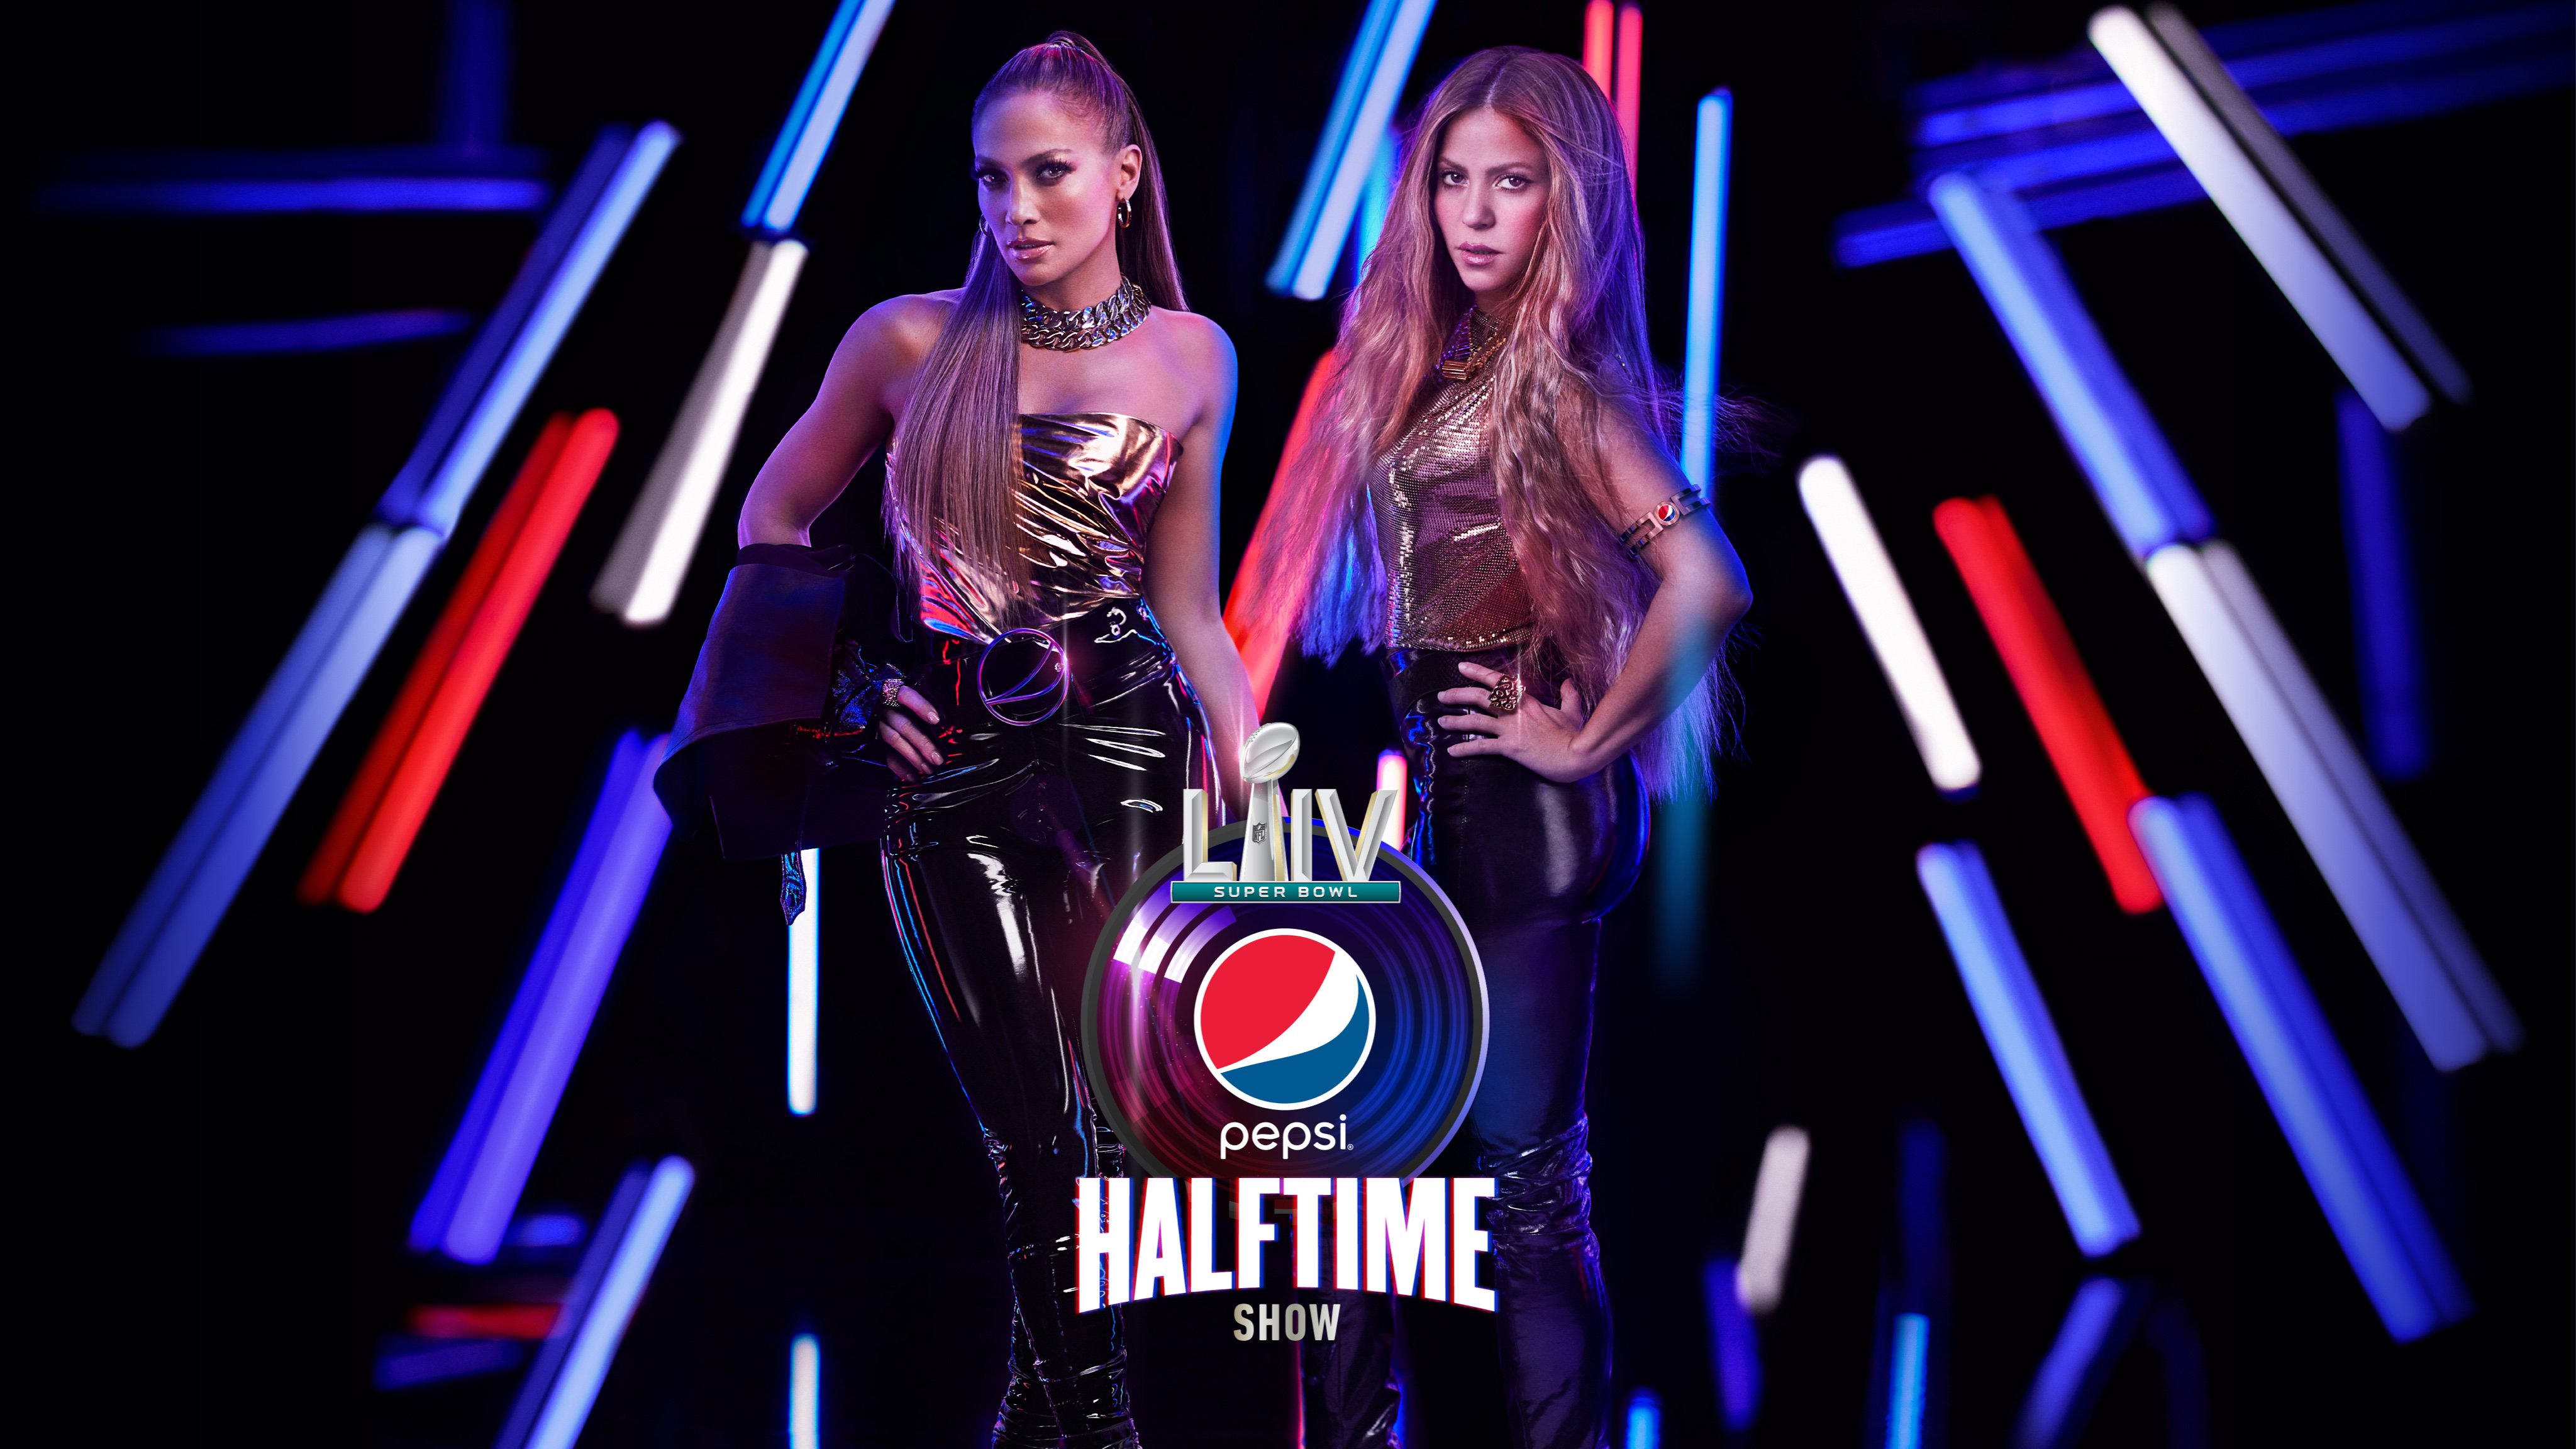 REPLAY: What say you on SUPER BOWL 2020 Pepsi half time show - CB360